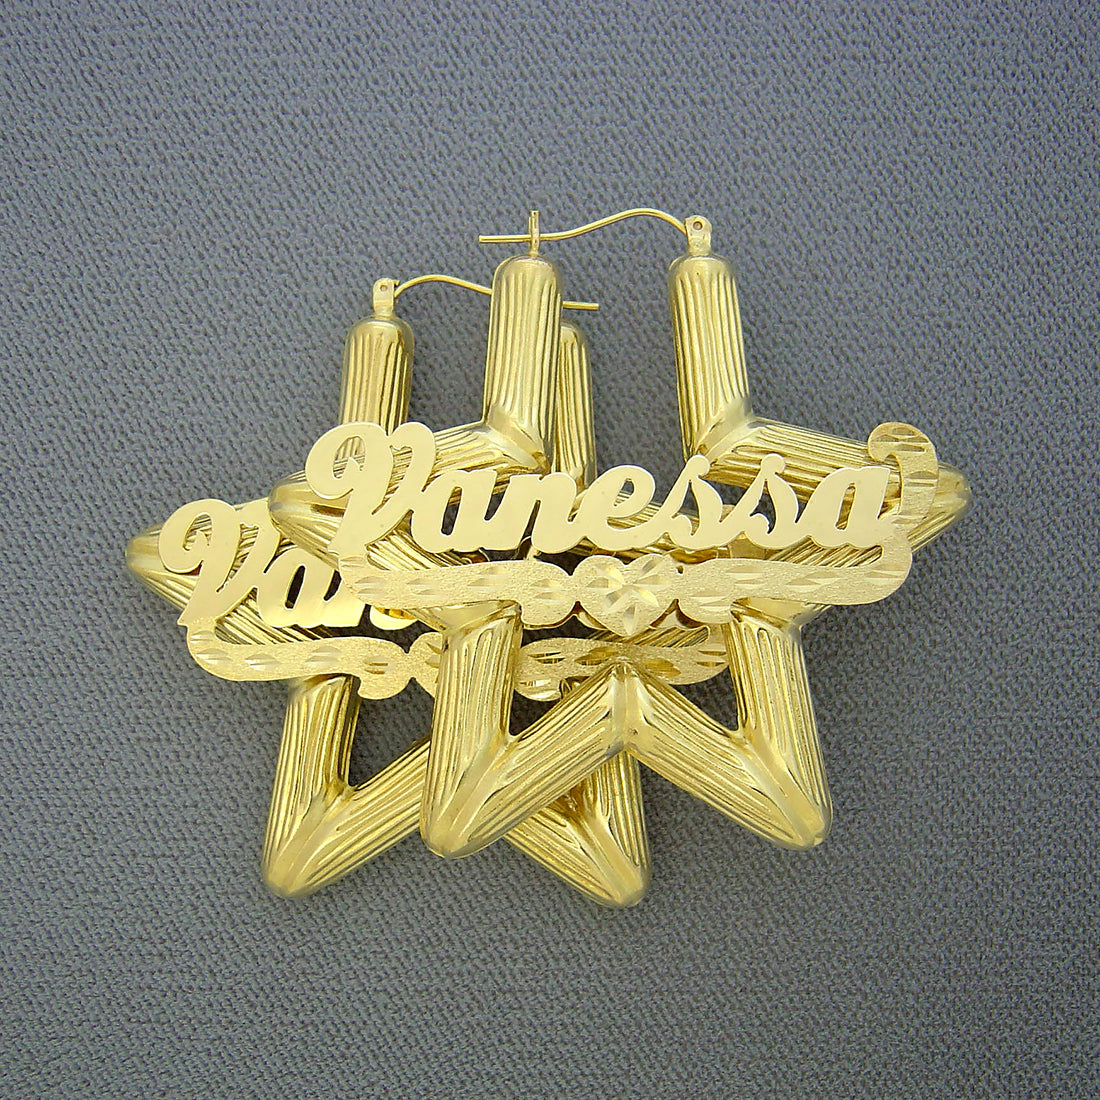 10K Gold Star Bamboo Personalized Shiny Name Earring 2.1 Inches Diamond Cut Heart Underneath Design